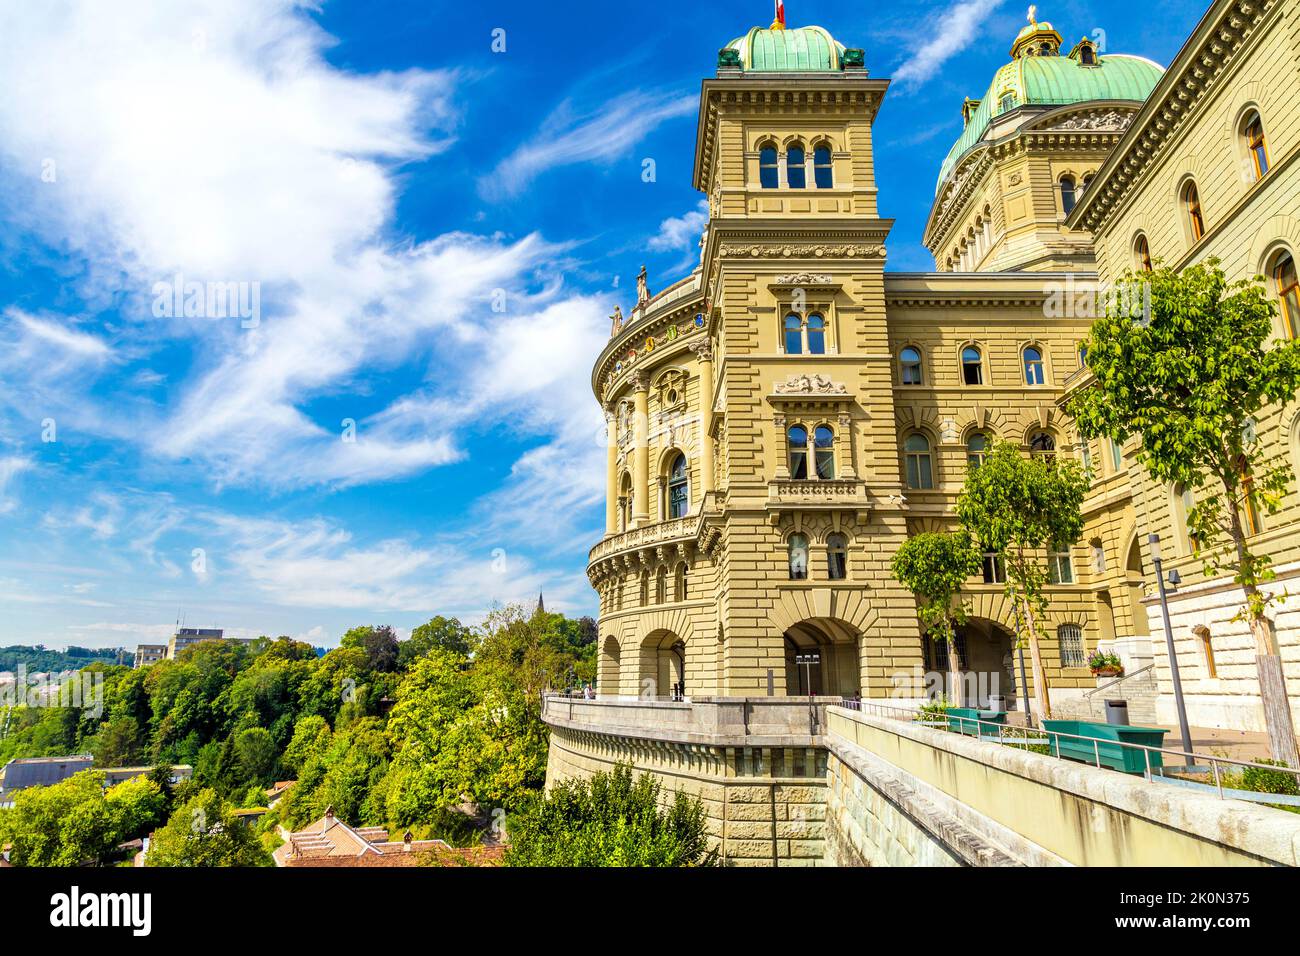 The Parliament Building (Federal Palace) made of Bernese sandstone overlooking the city, Bern, Switzerland Stock Photo